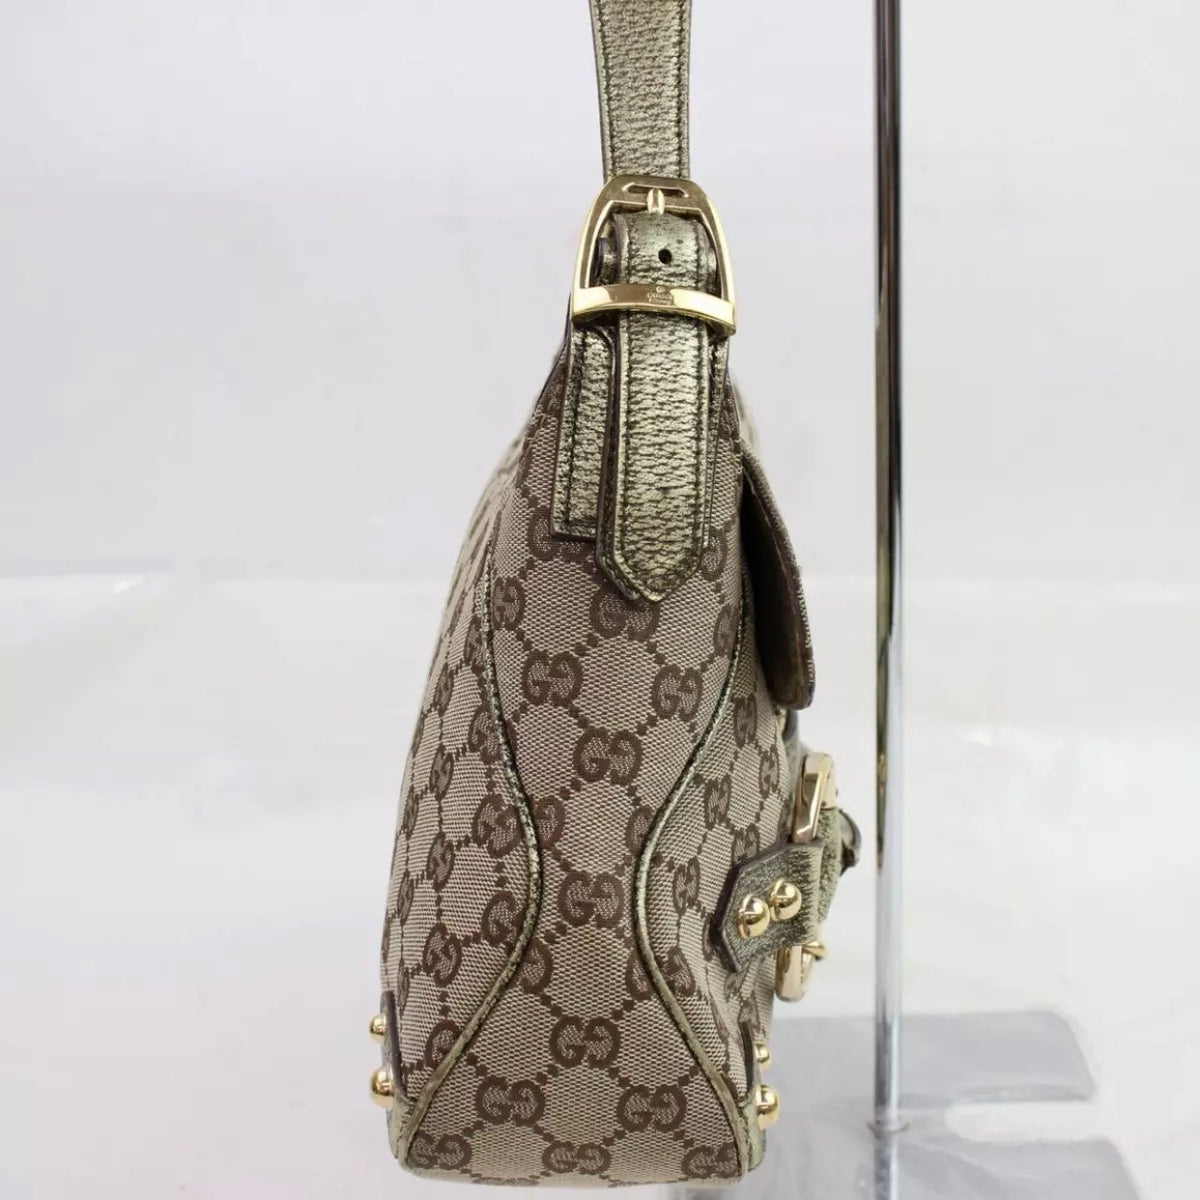 Gucci, Bags, Authentic Gucci Large Horsebit Hobo Bag Cream Leather